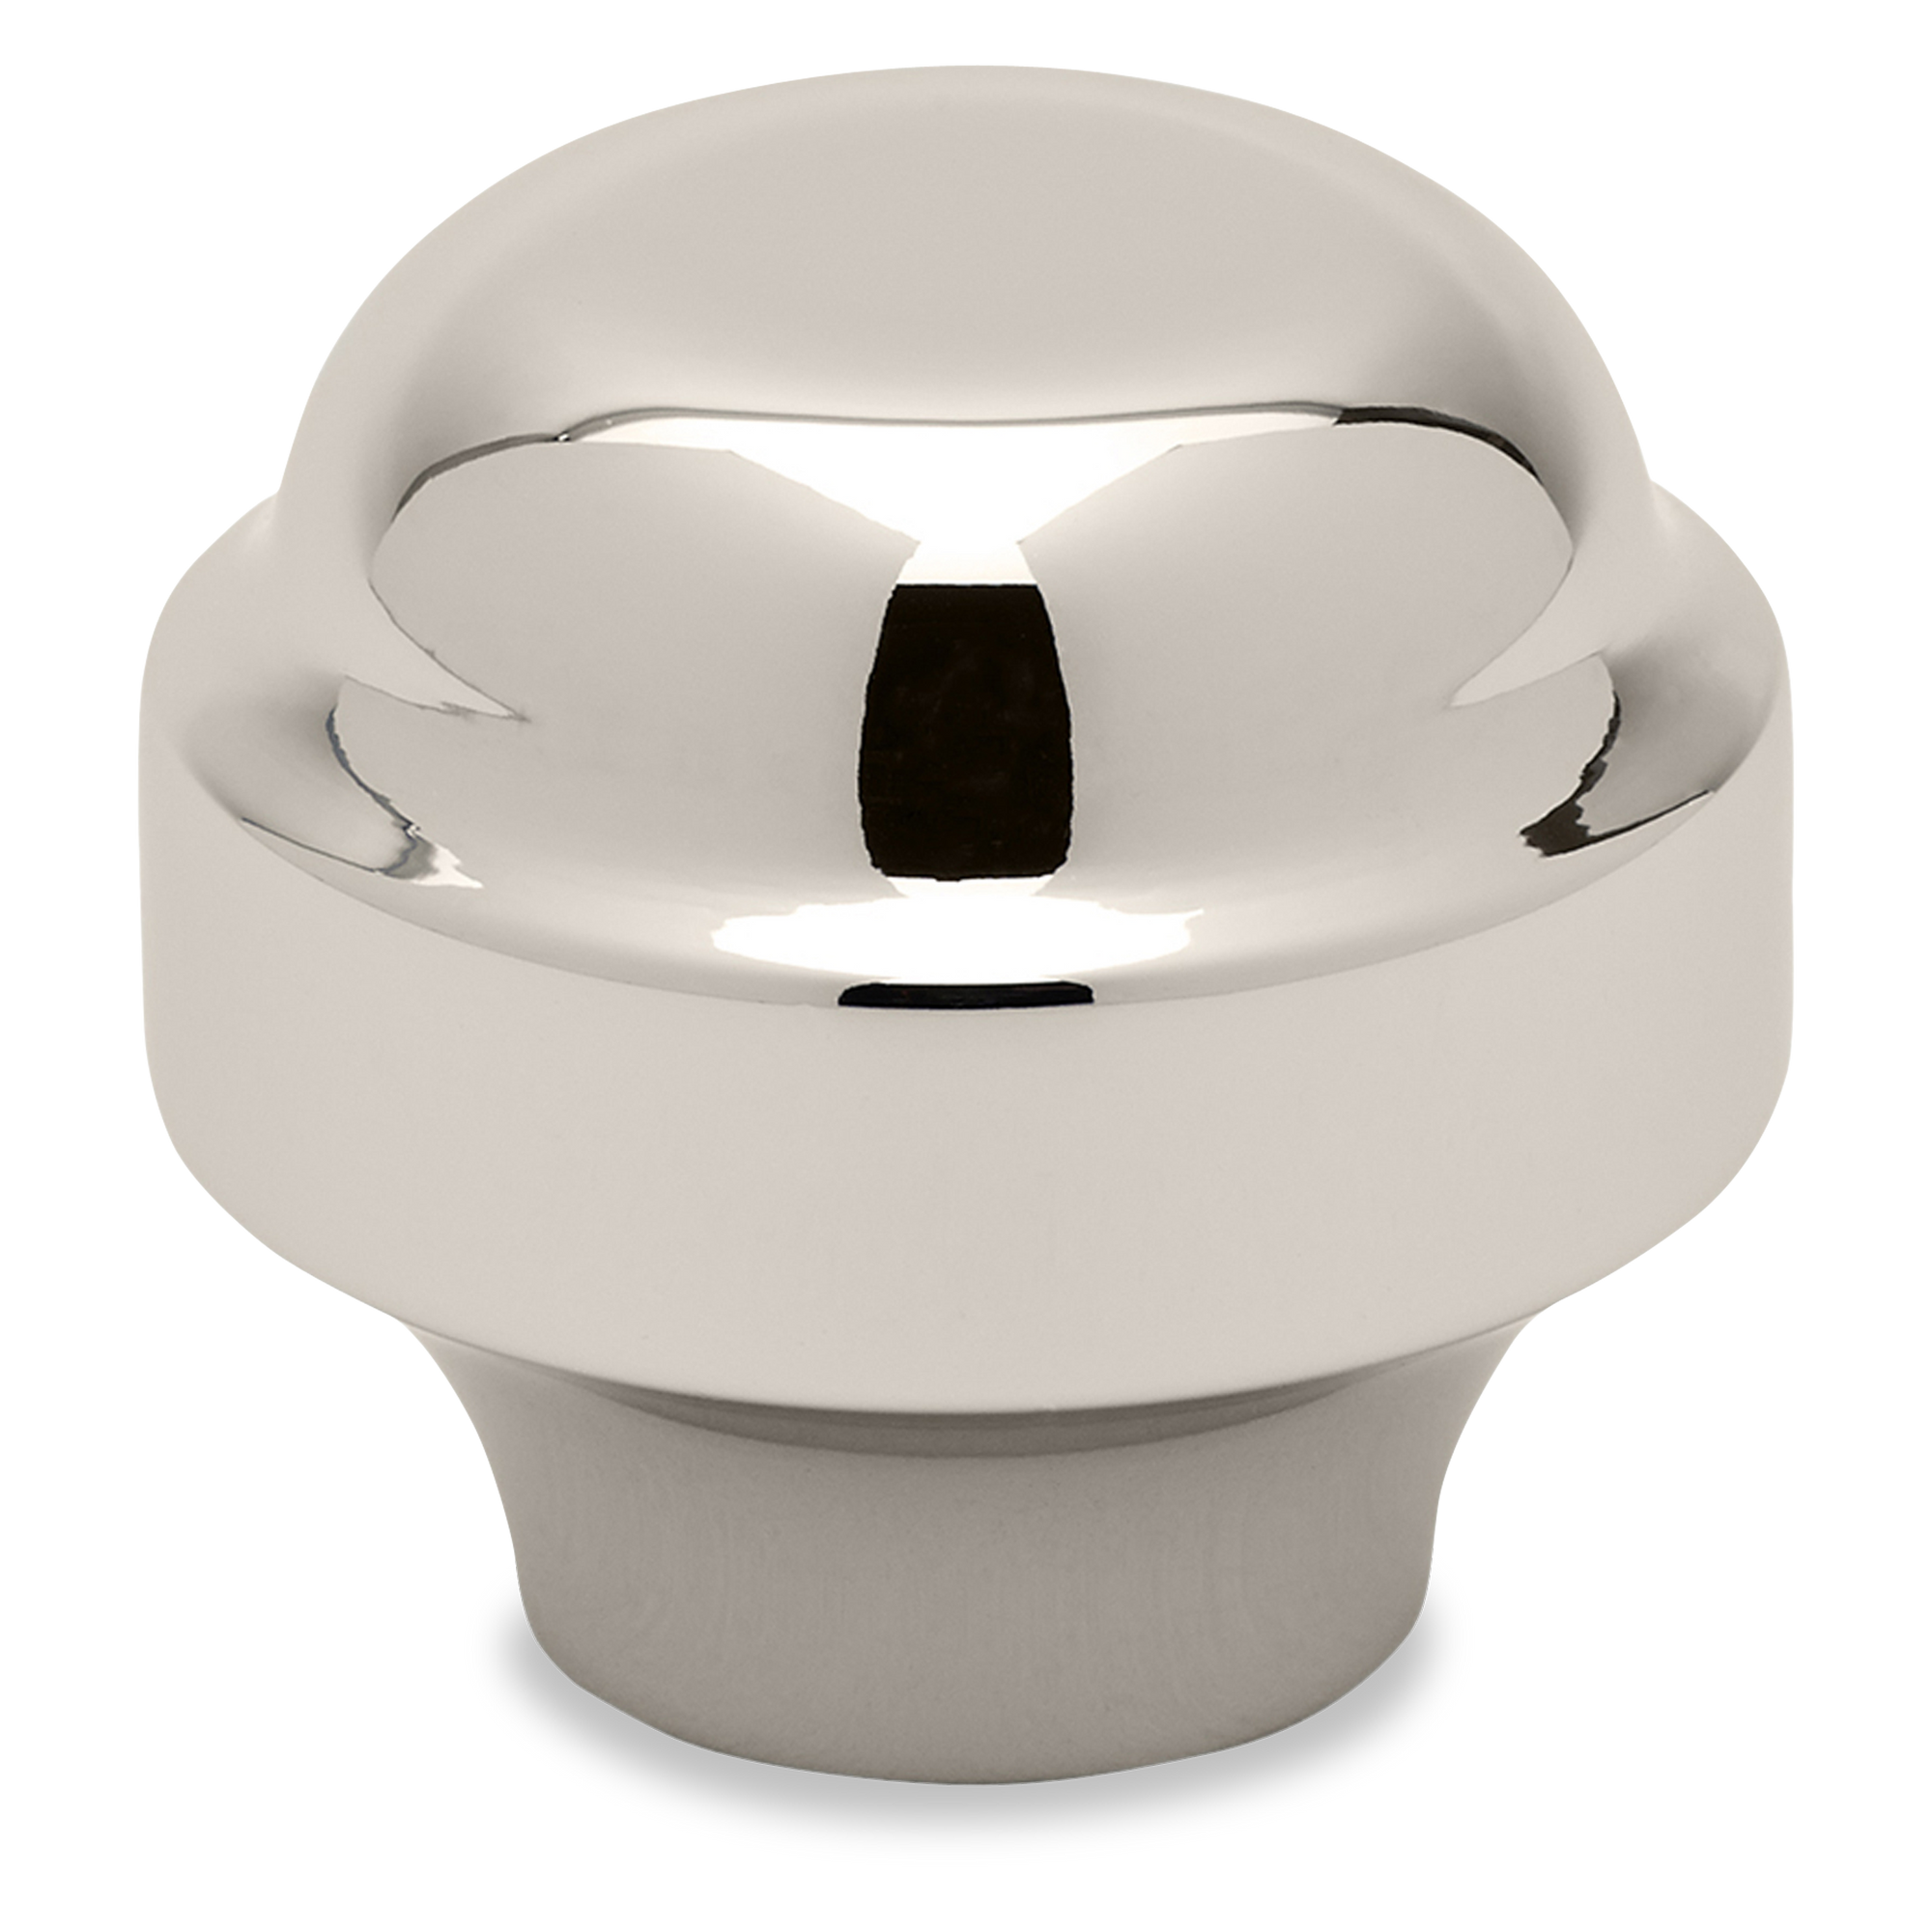 Inspired by the Edwardian era, the Easton knob brings an air of sophistication to your space.